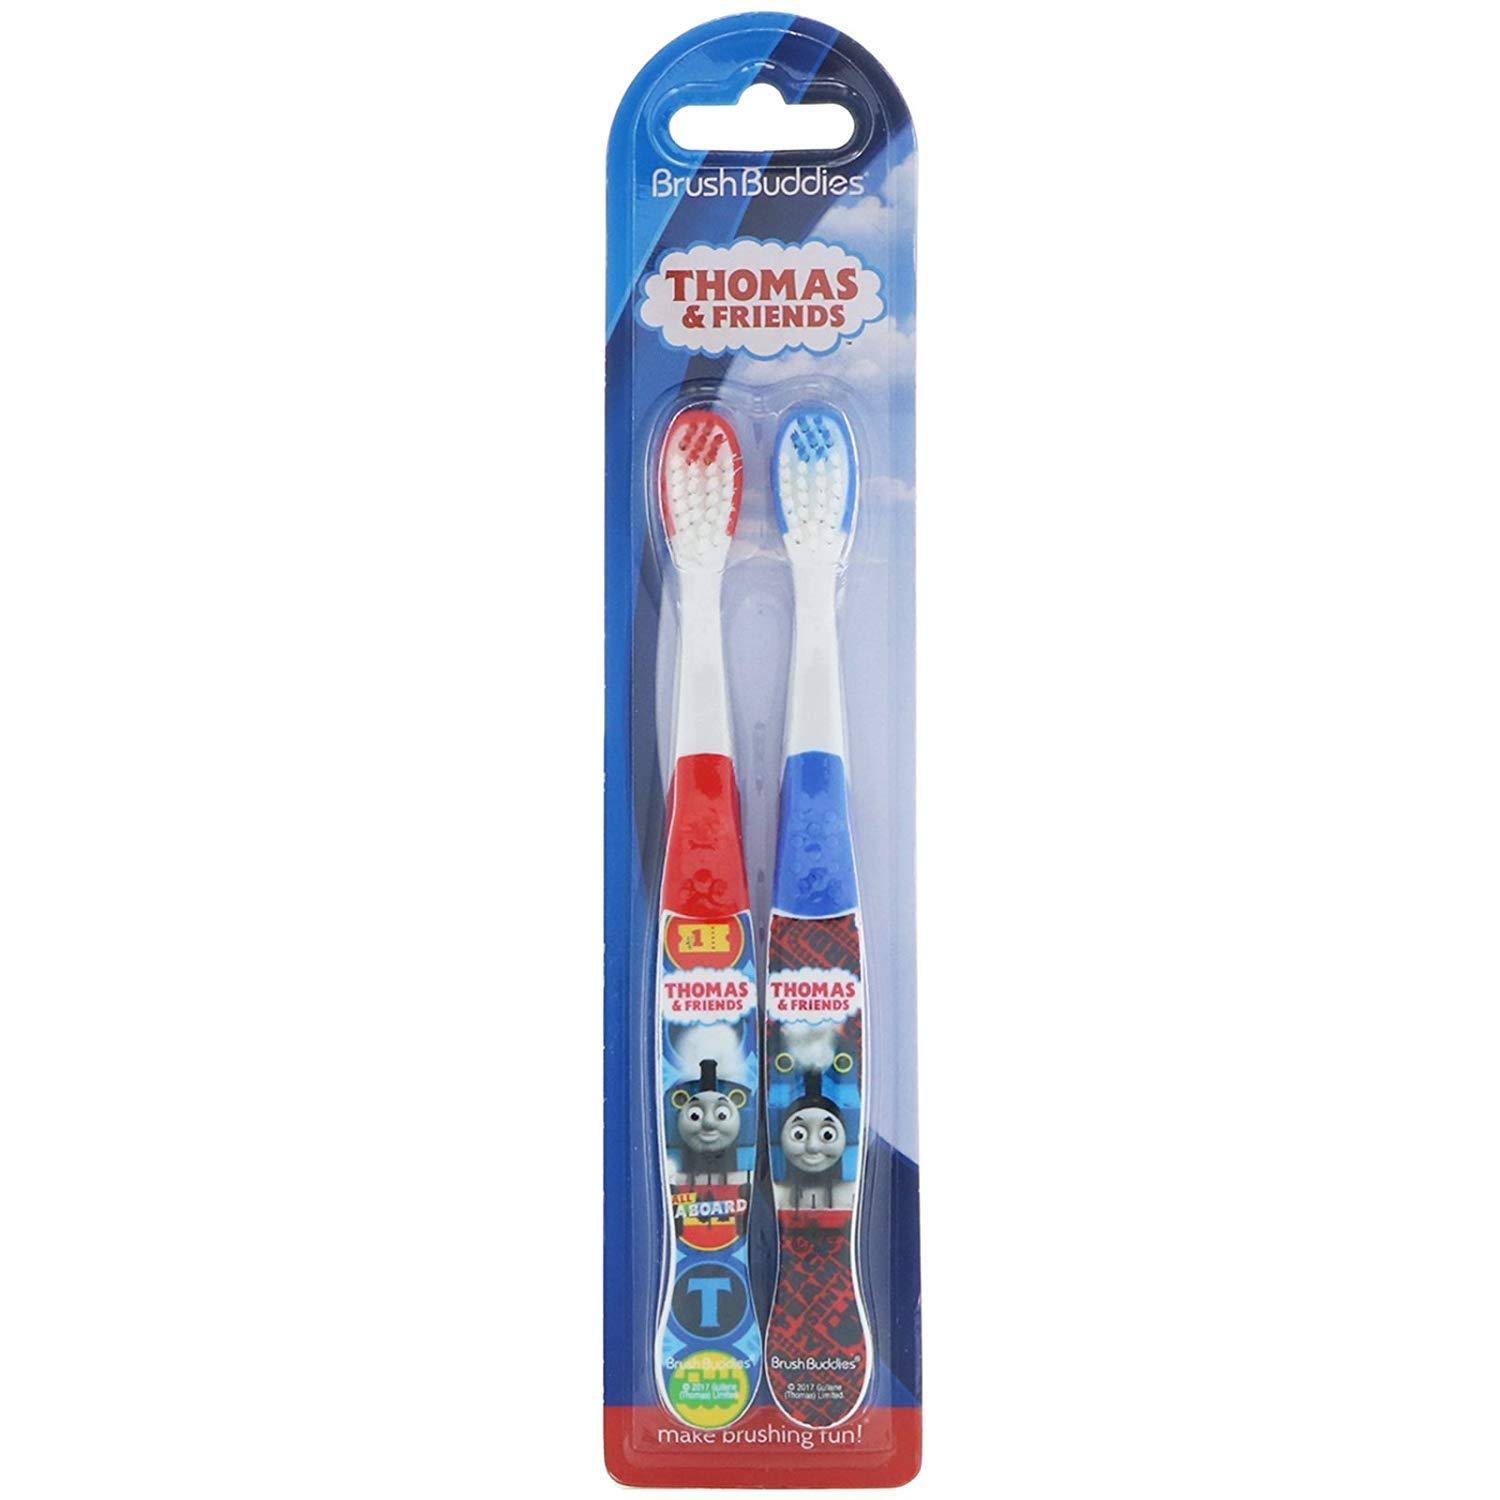 Thomas and Friends Children's Manual Toothbrushes - 2pcs